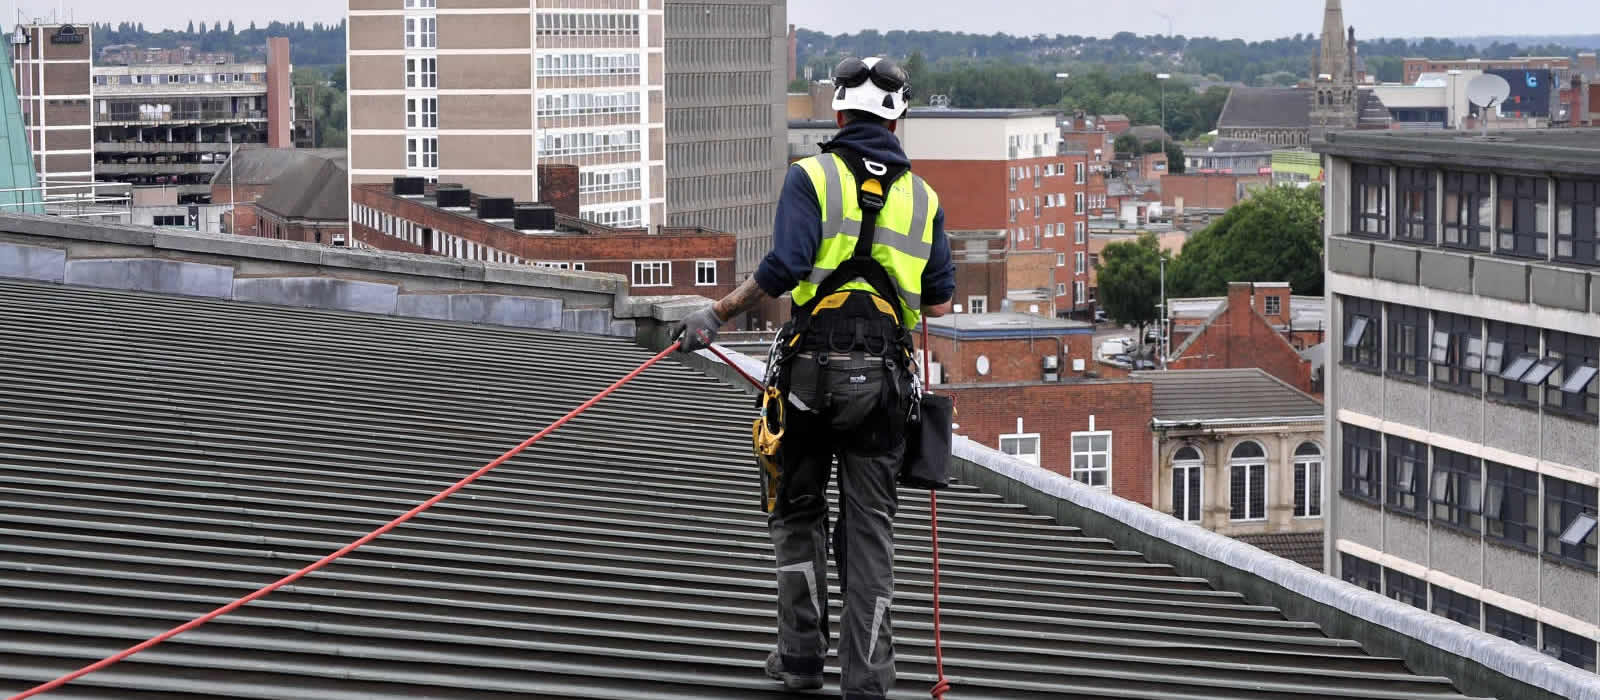 roofing and cladding contractor Manchester